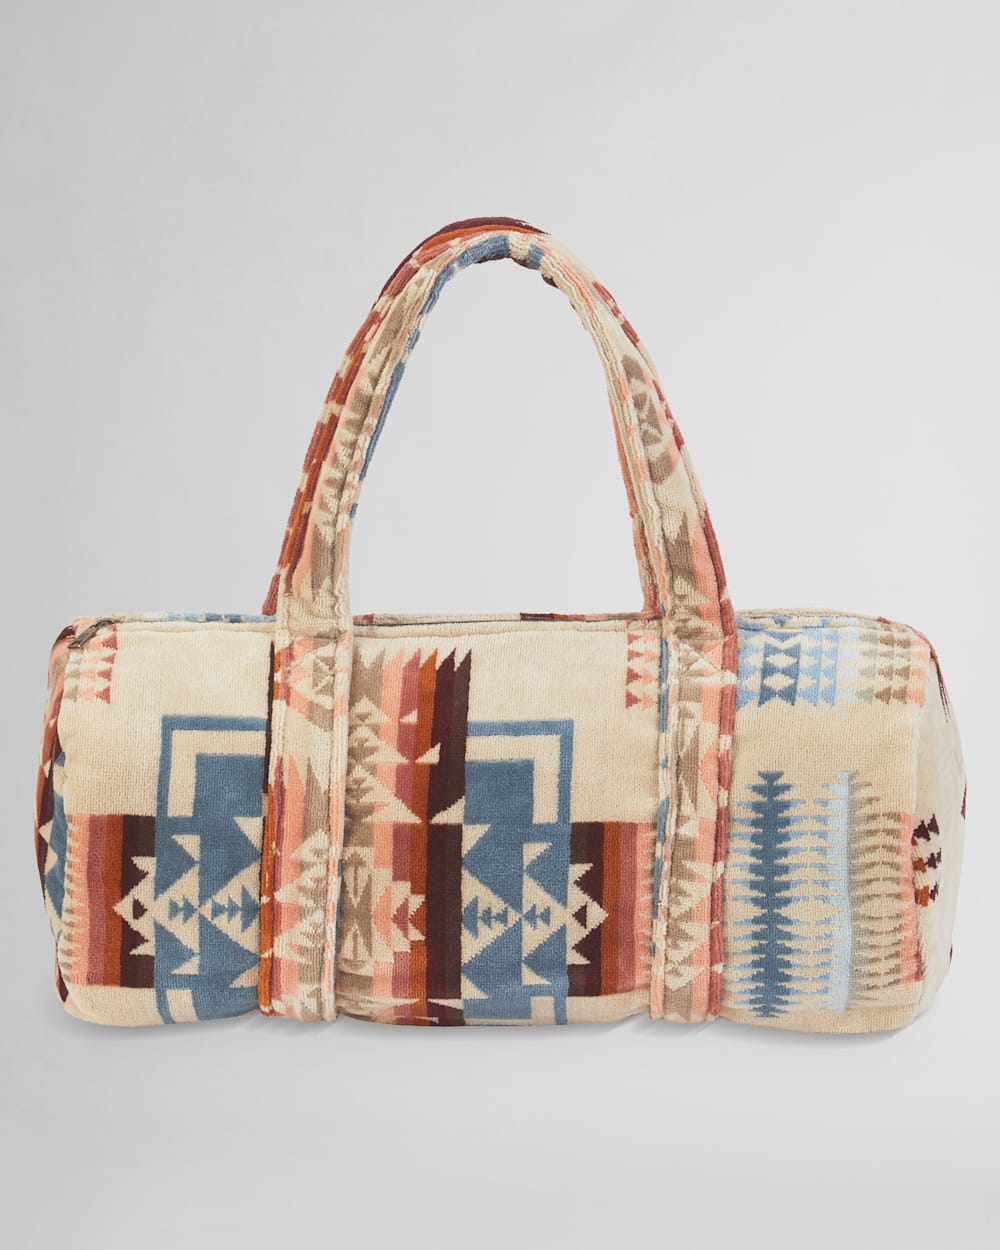 ALTERNATE VIEW OF TERRY CLOTH DUFFEL IN CHIEF JOSEPH ROSEWOOD image number 2